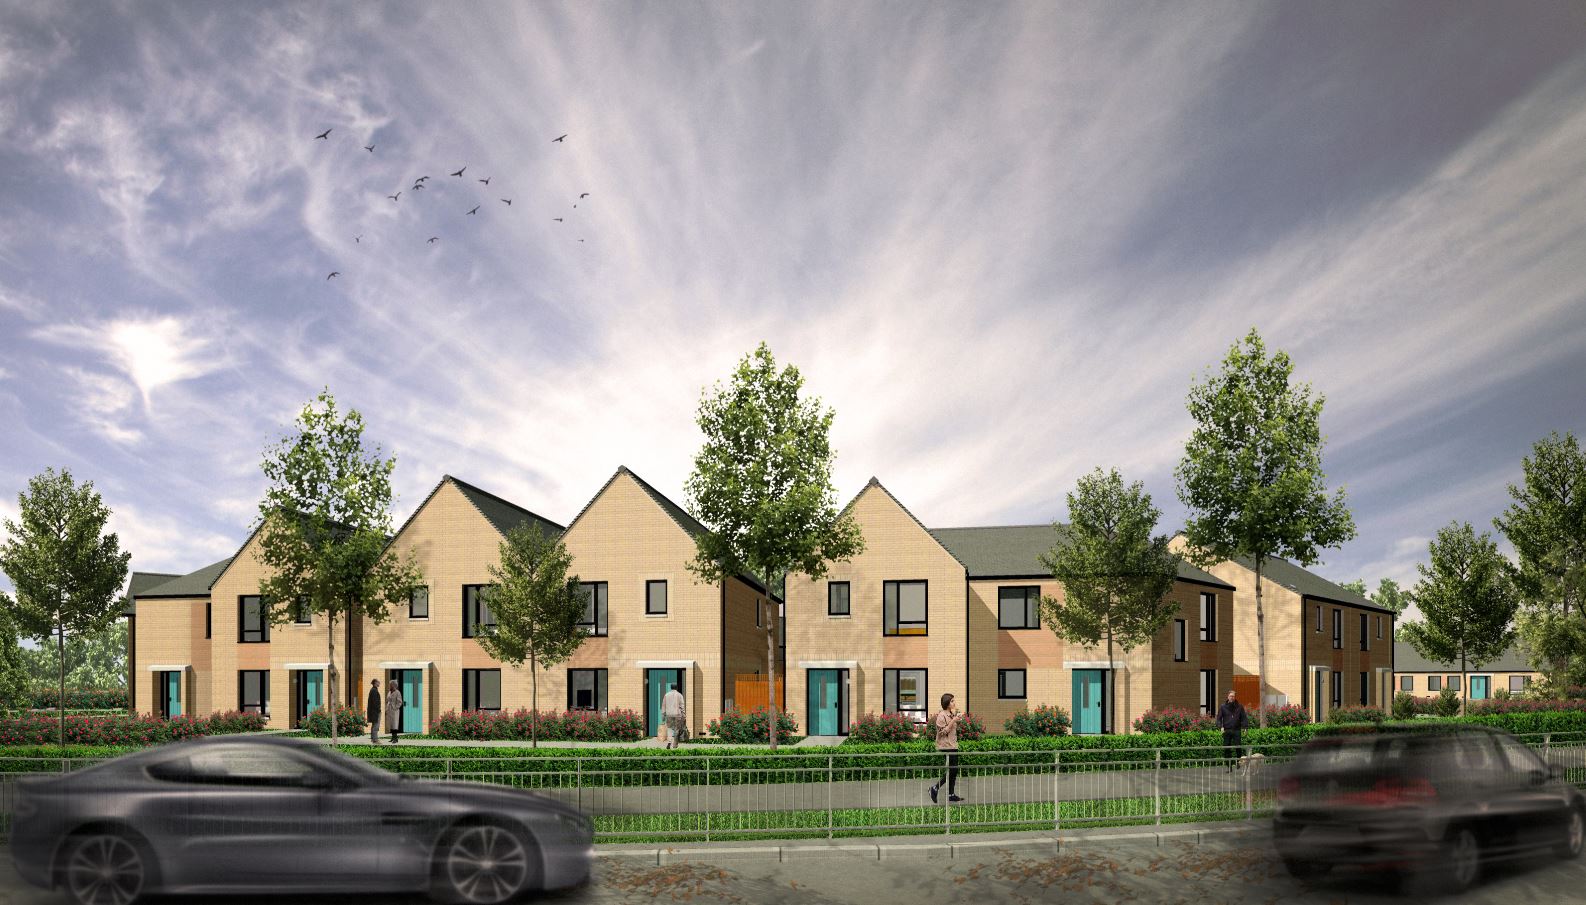 CGI of the Westdale development. Front view of the modern two-storey homes with greenery and trees scattered in the forefront and a beam of sunshine emerging behind the rooves.